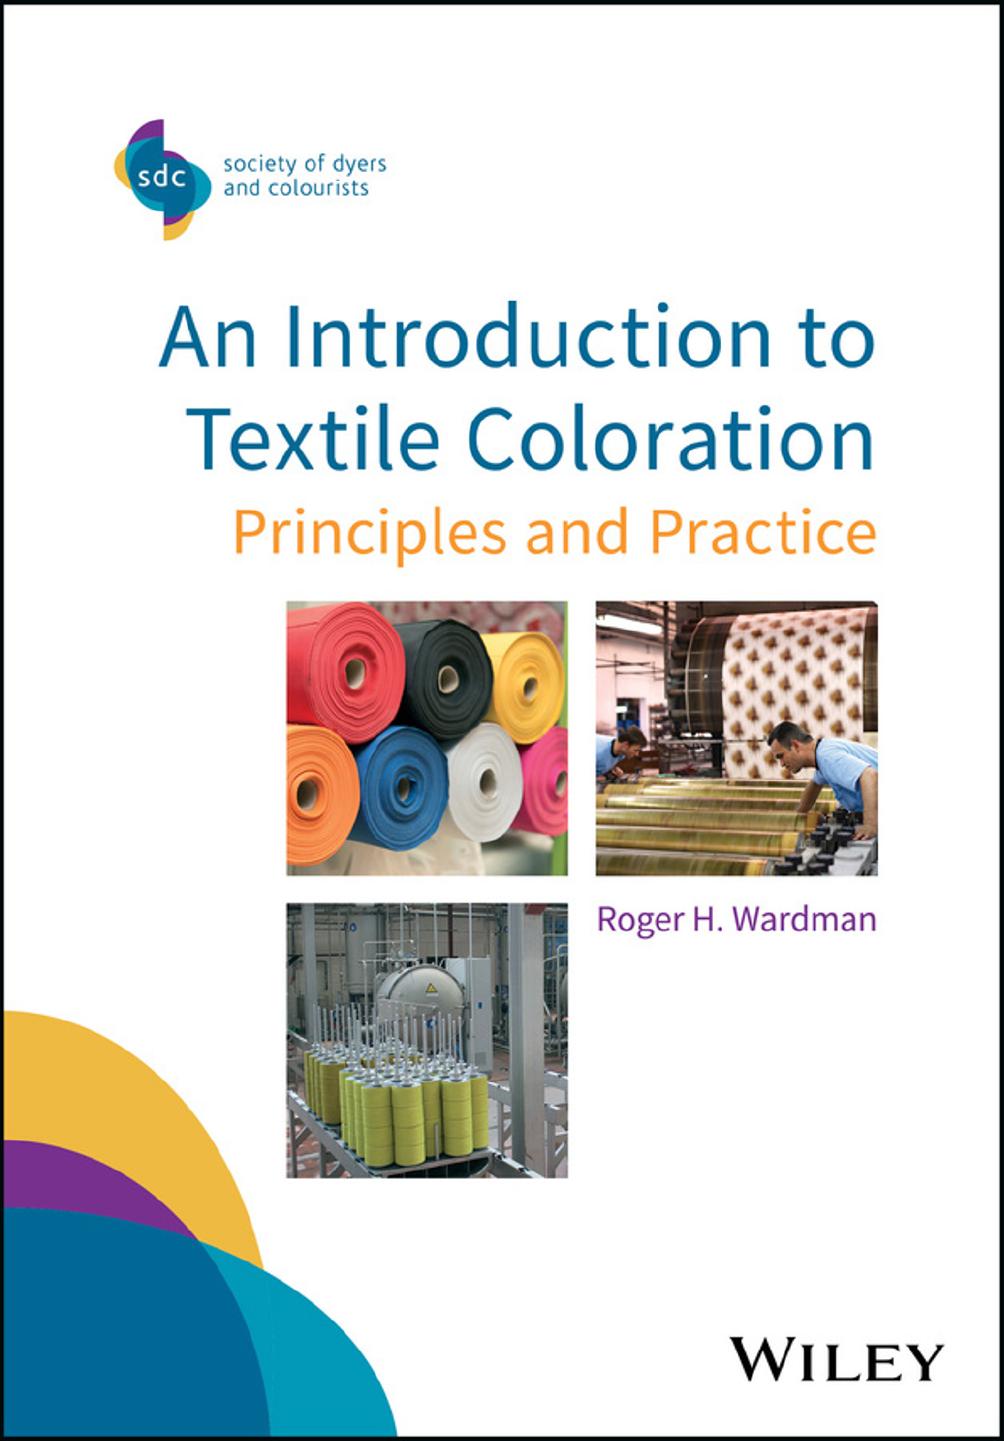 An Introduction to Textile Coloration: Principles and Practice